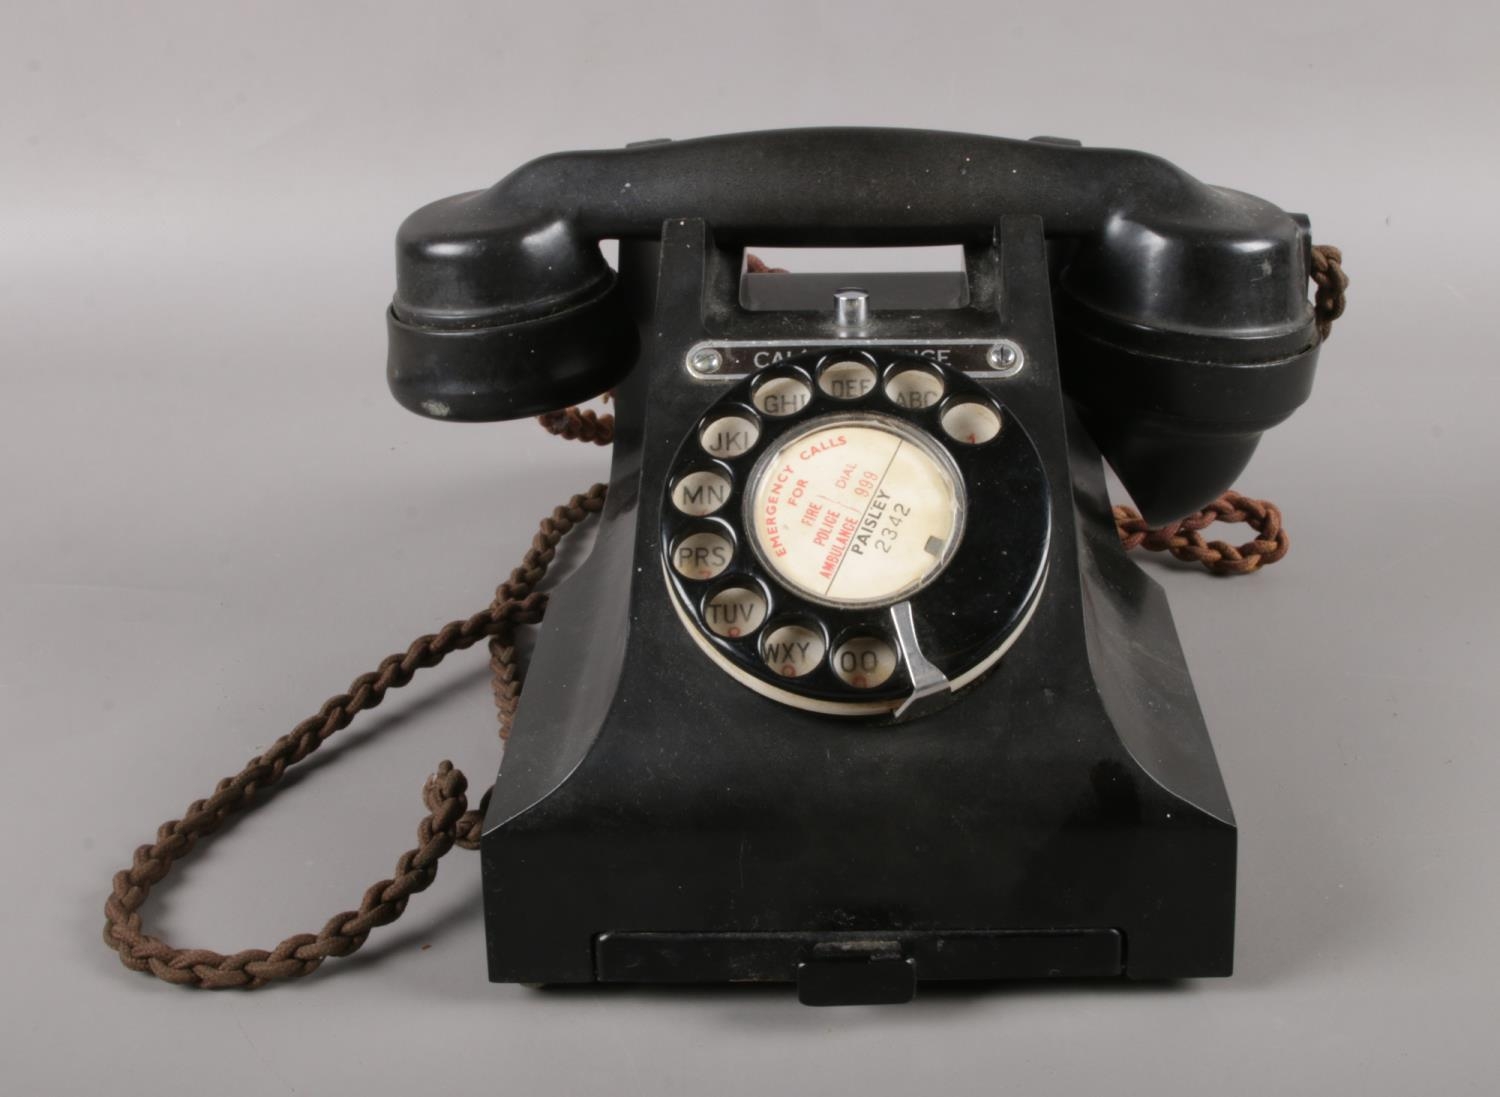 A Call Exchange bakelite telephone. (Model No 312L S53/3A) with pull out tray & braided cable.